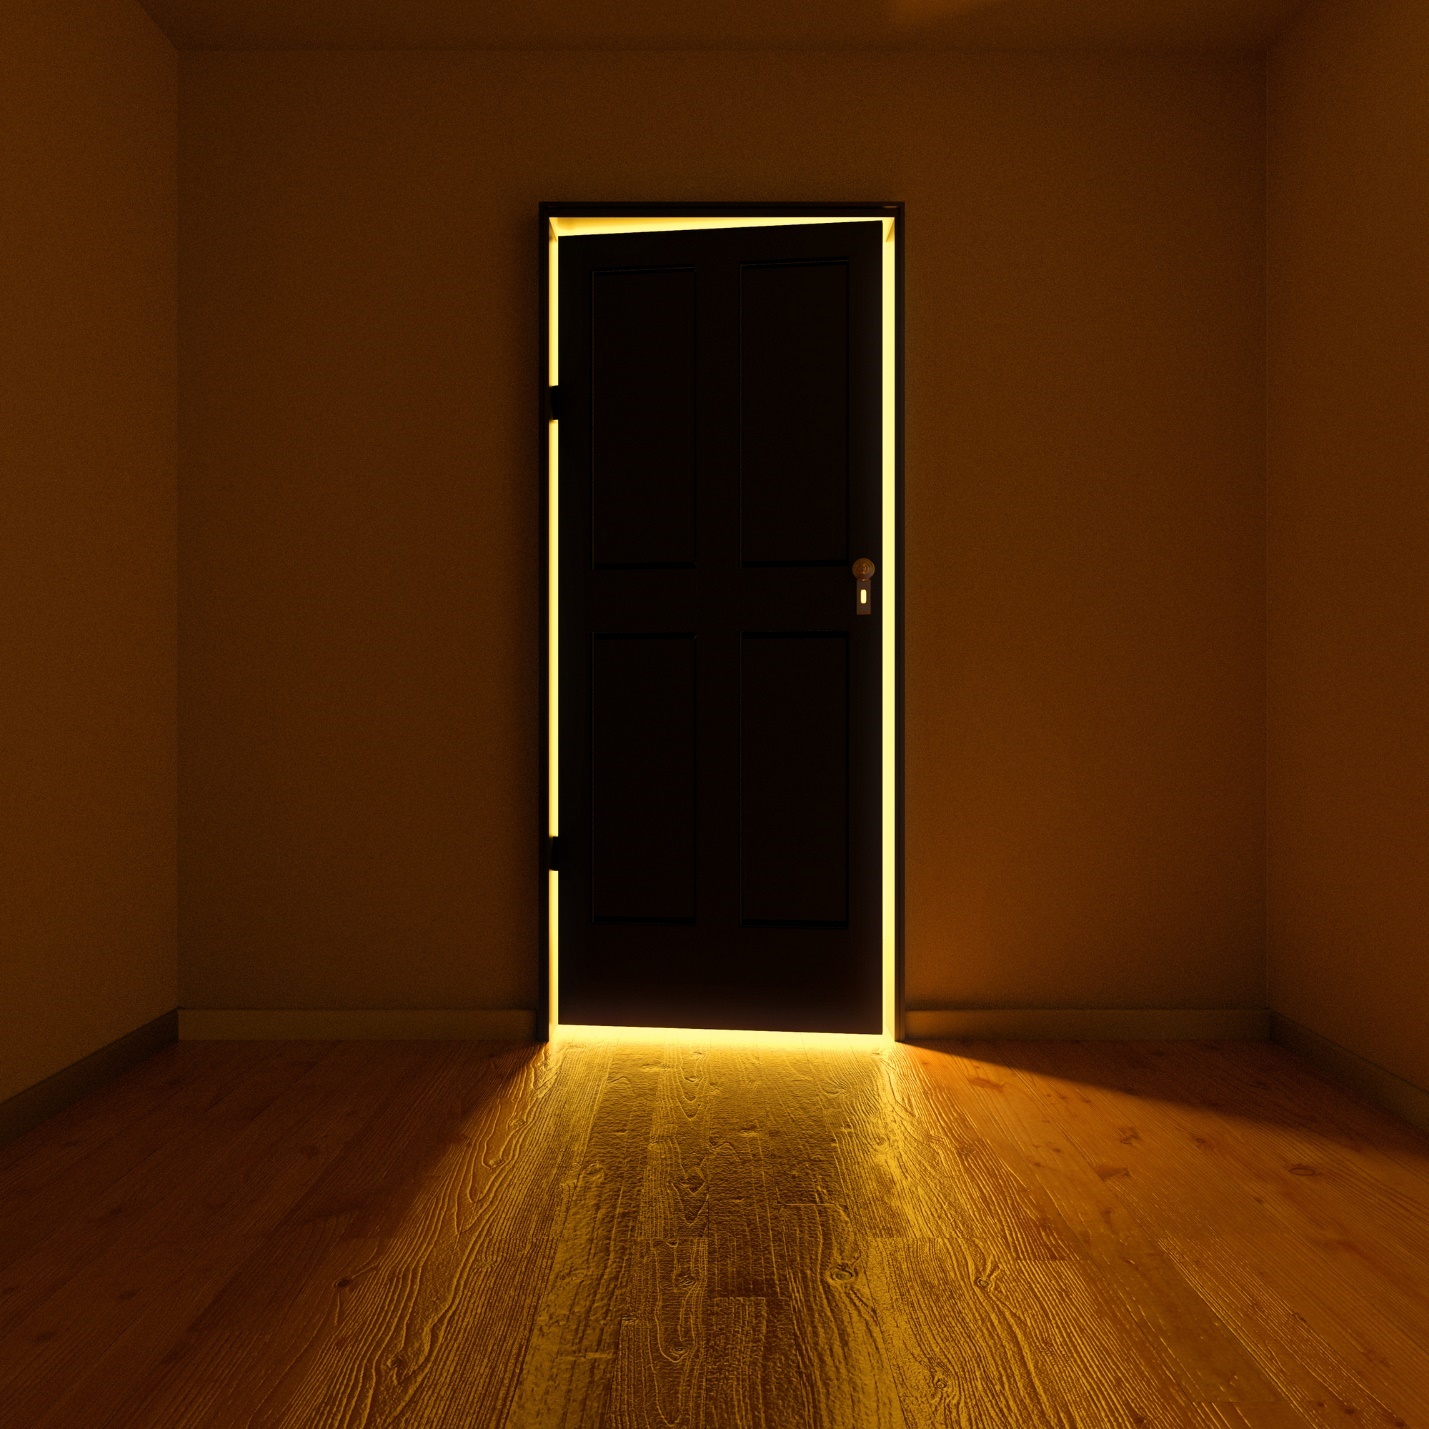 A dark door in a room

Description automatically generated with low confidence